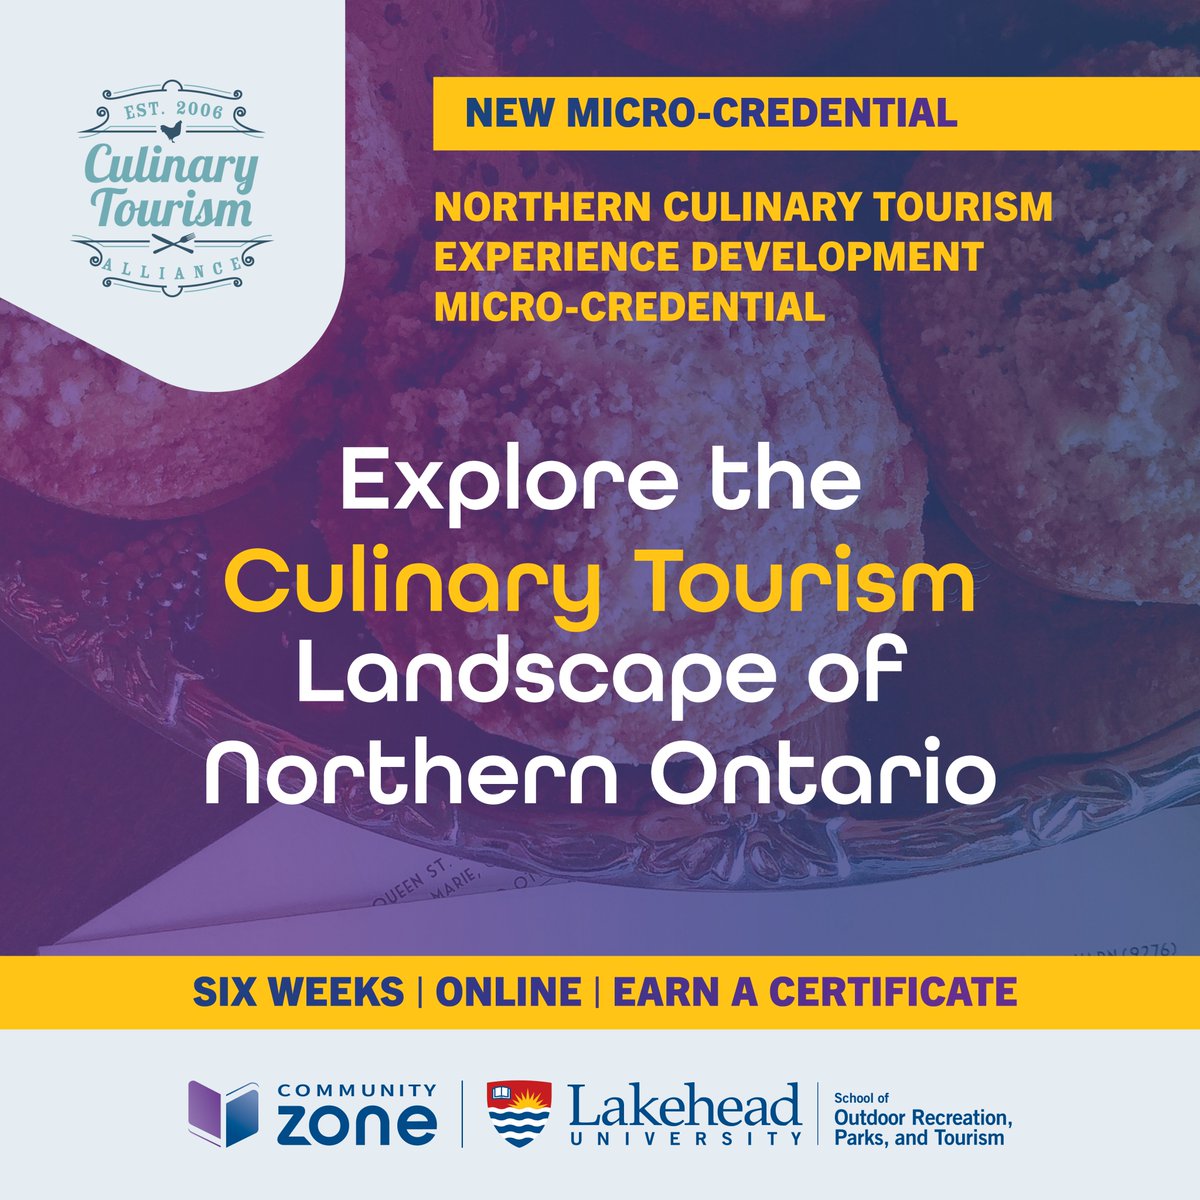 🍽️🌲Online micro-credential! Over six weeks, explore the culinary tourism landscape with an emphasis on #NorthernOntario by @mylakehead, developed with @OntarioCulinary: bit.ly/45ulTNy #LakeheadUniversity #czlearn #CulinaryTourism #FoodCulture #MicroCredential